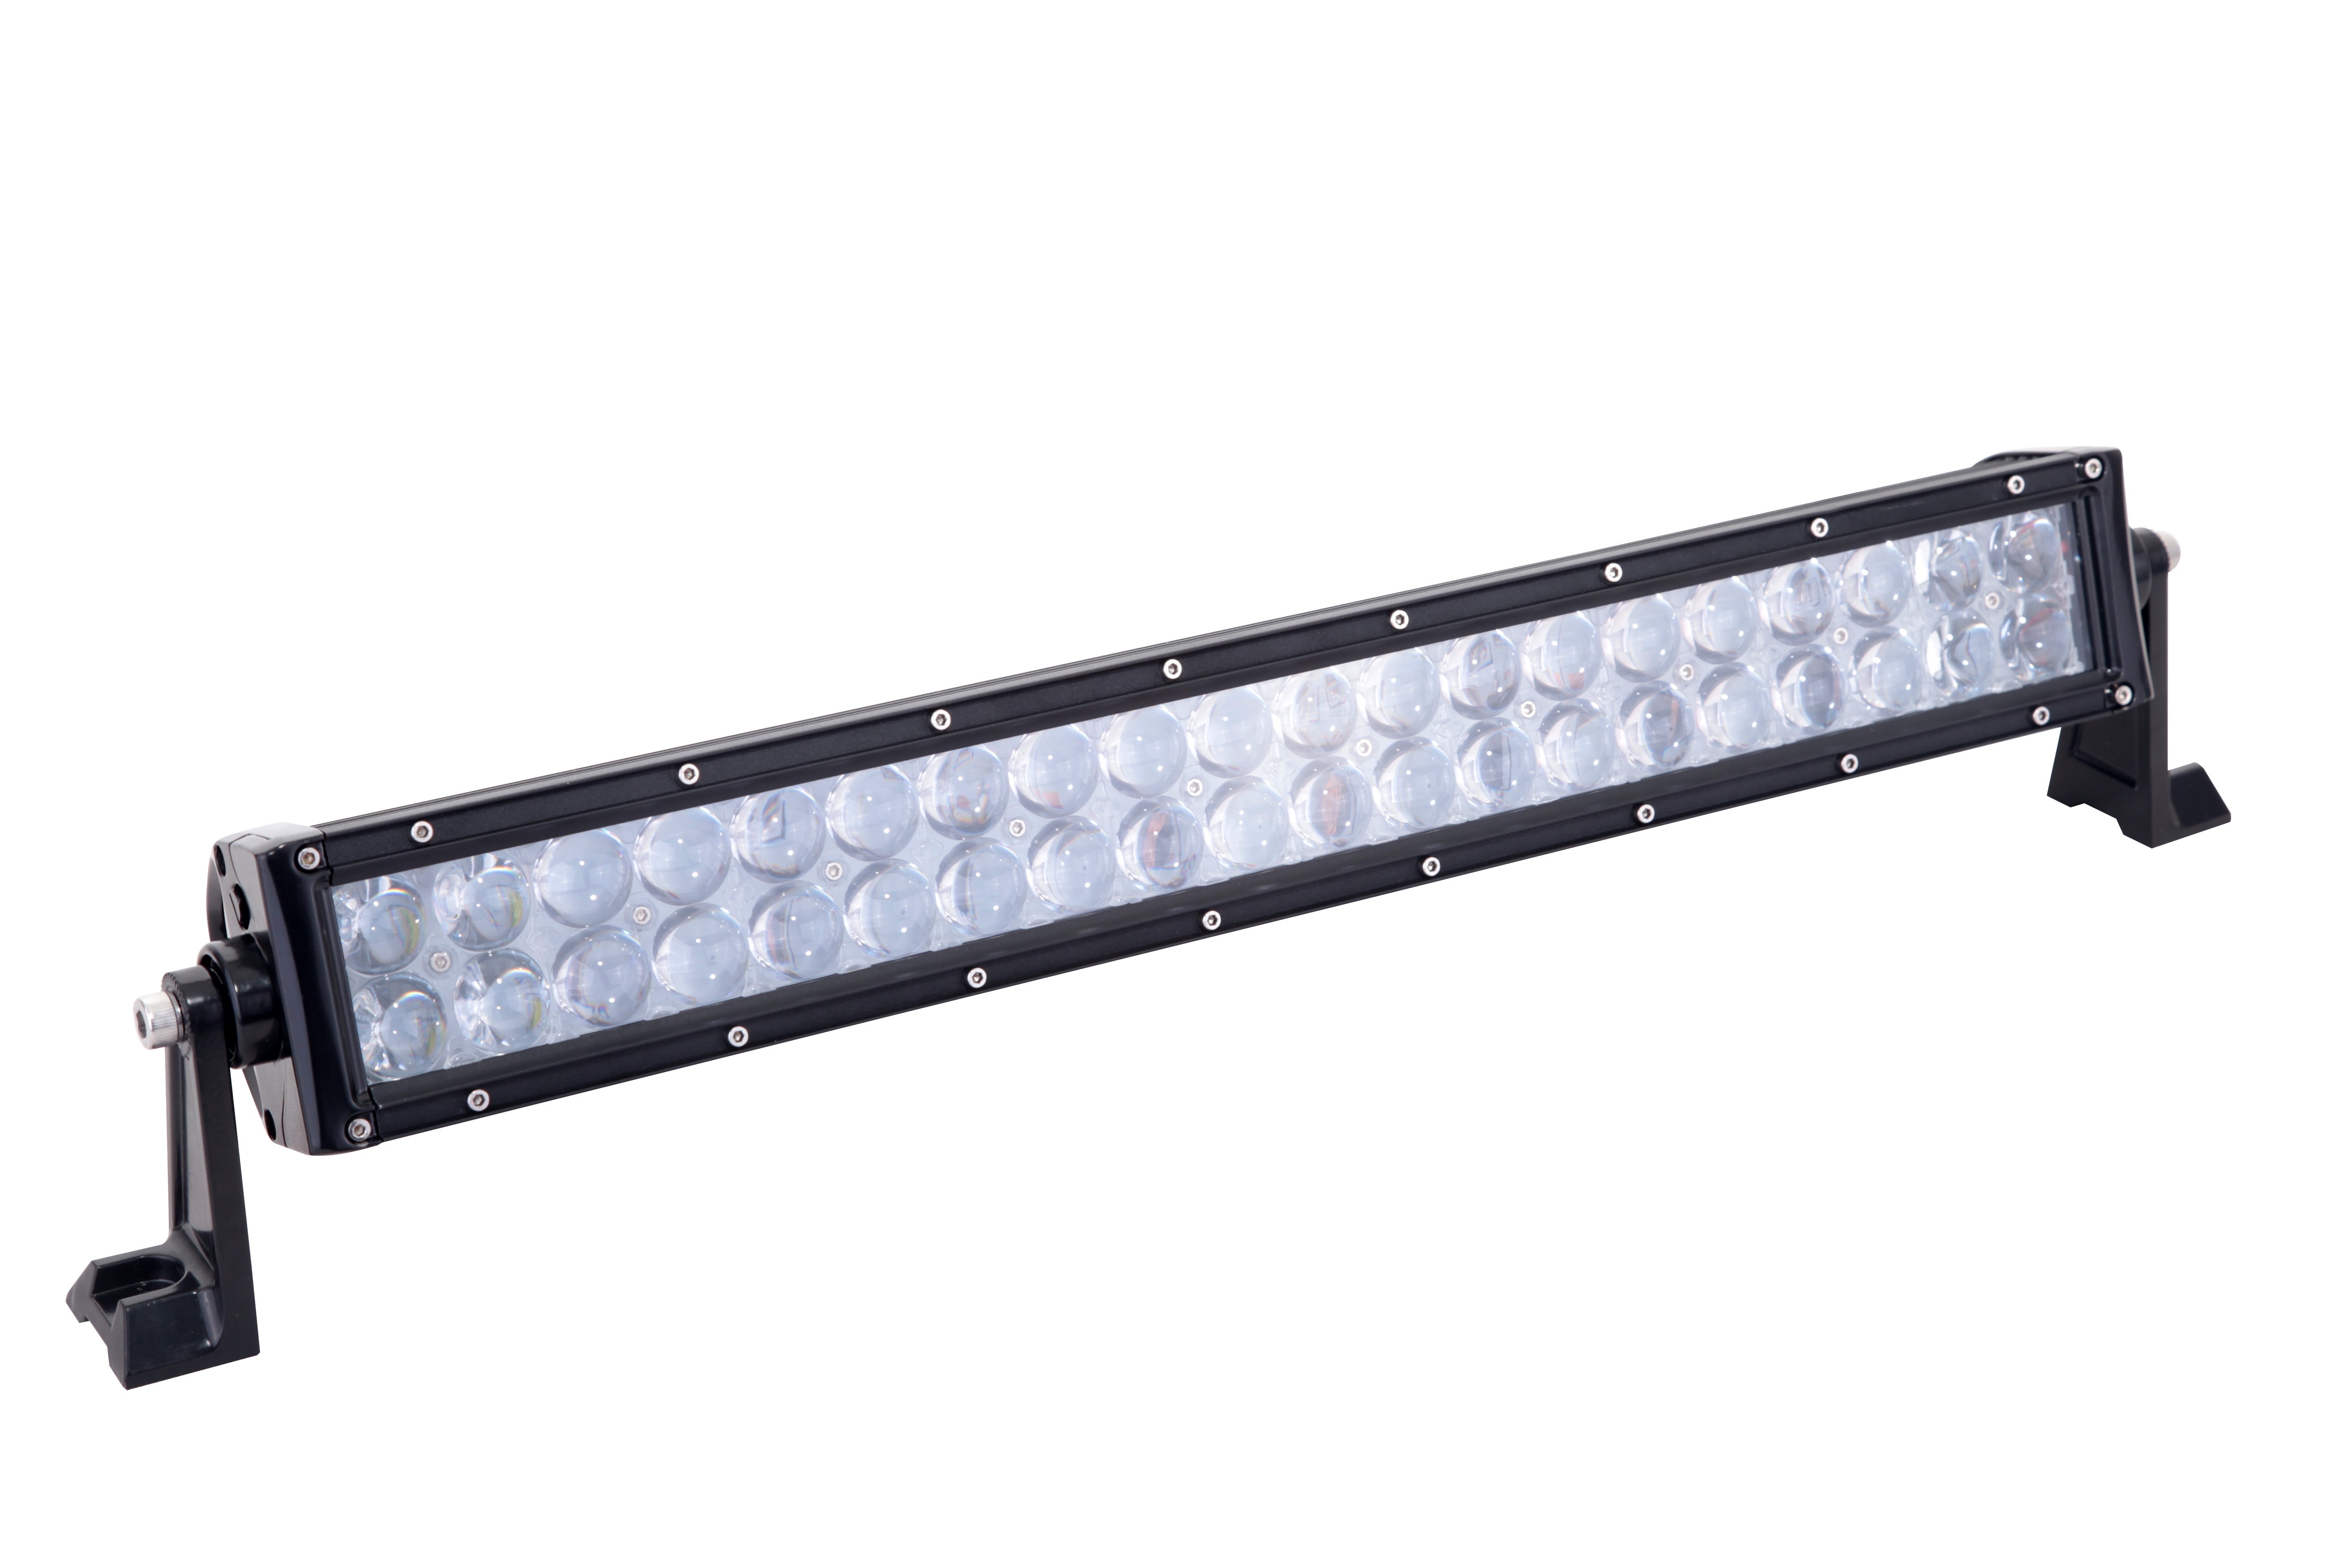 Barre Led Voiture pas cher - Achat neuf et occasion